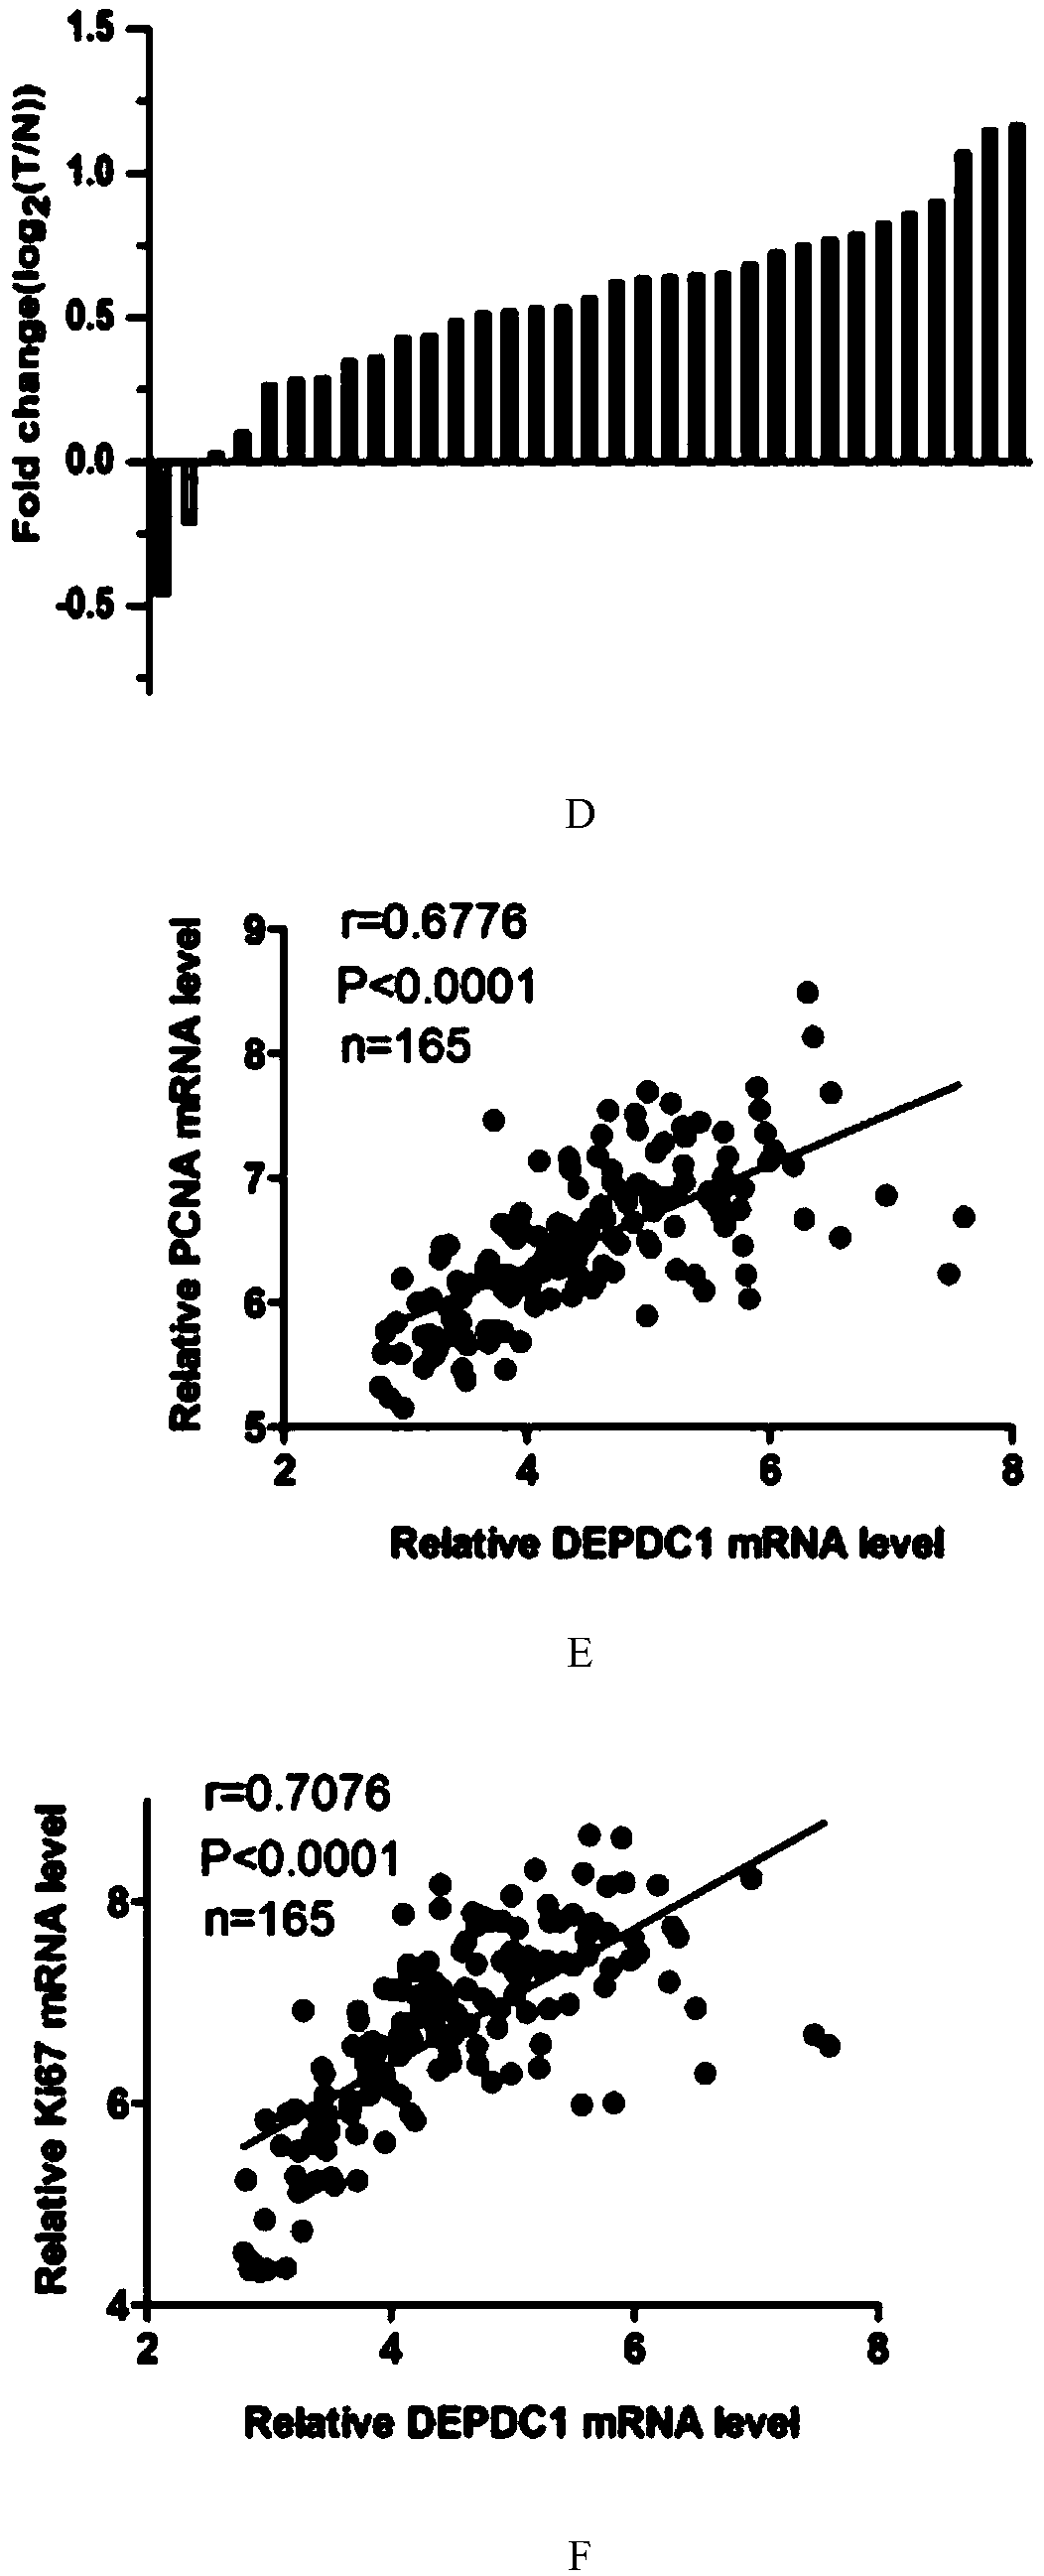 Application of protein DEPDC1 (Dishevelled and EGL-10, Pleckstrin Domain-Containing protein 1) as marker for diagnosing triple negative breast cancer